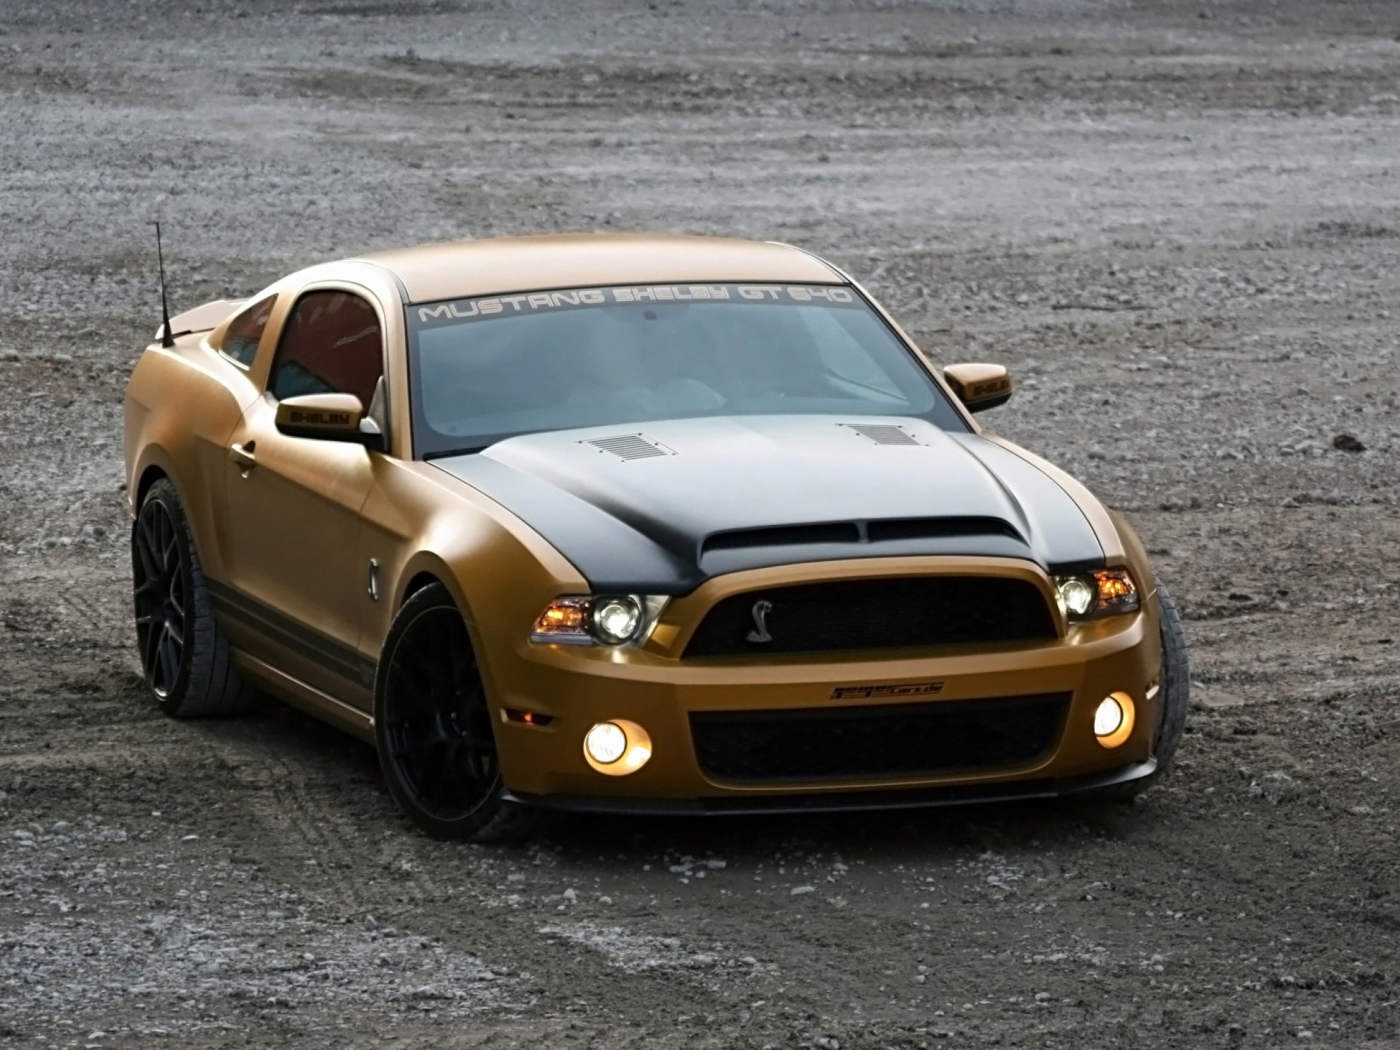 Das Ford Mustang Shelby GT640 Wallpaper 1400x1050